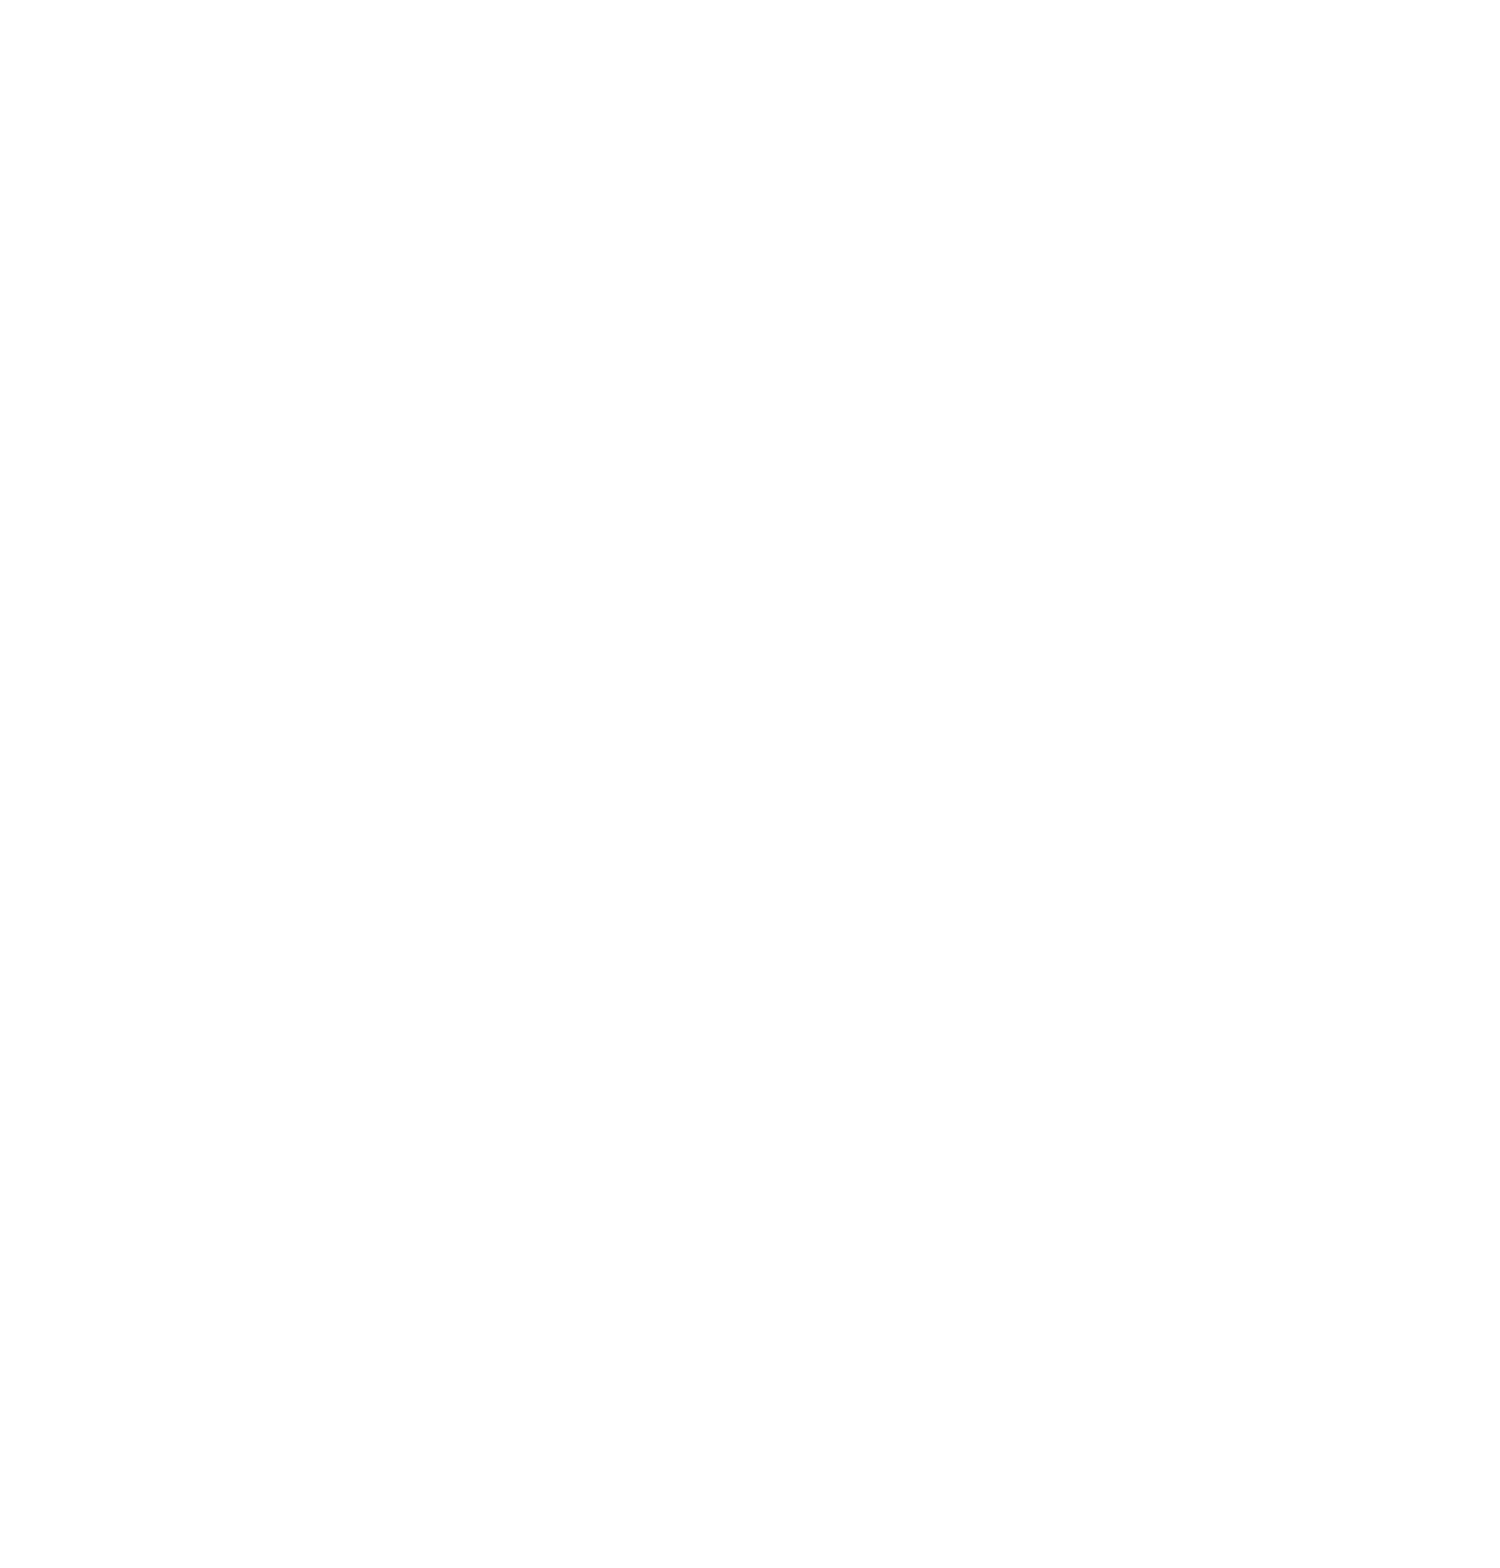 www.tellicooutfitters.com